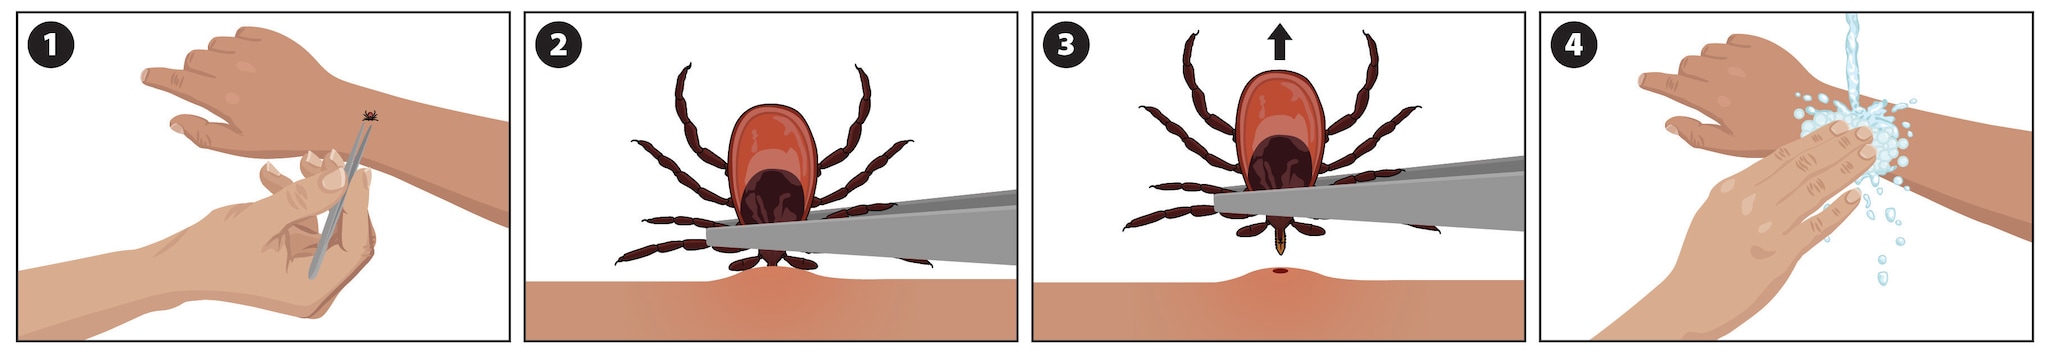 Illustration showing how to remove a tick (Ixodes scapularis pictured).